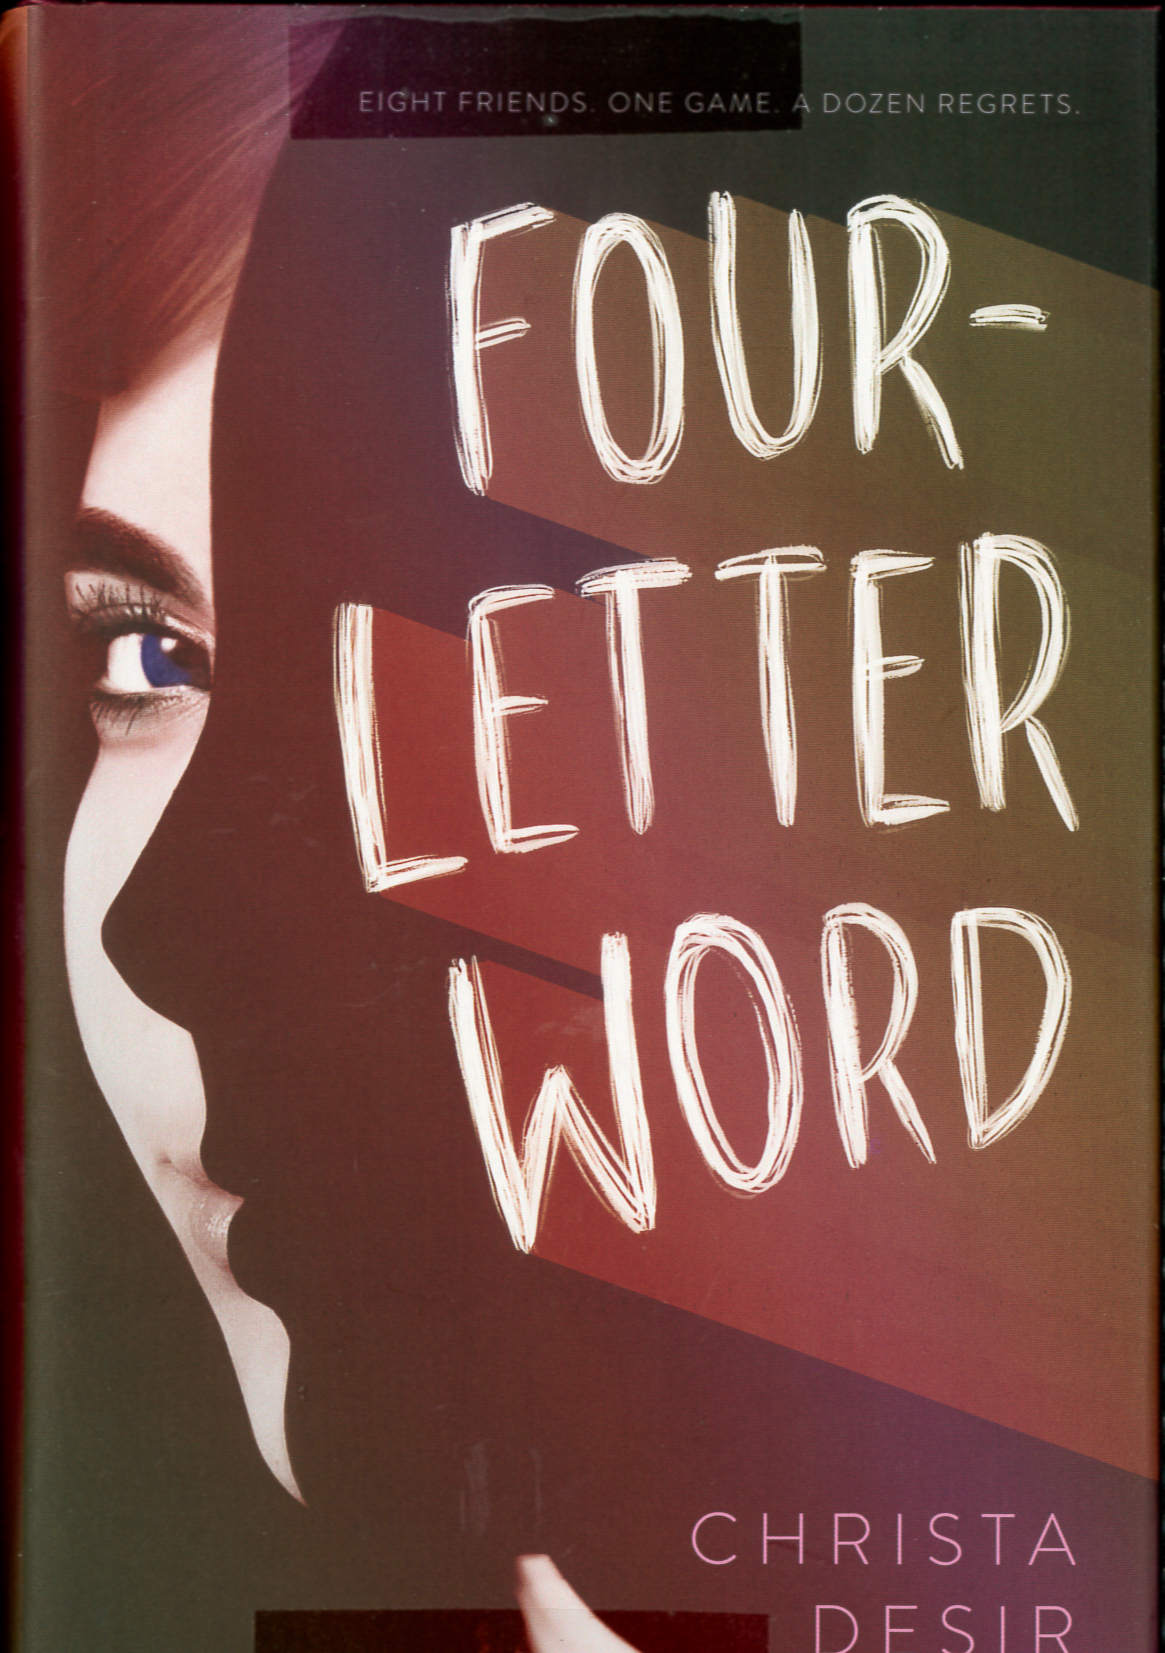 Four - letter word /